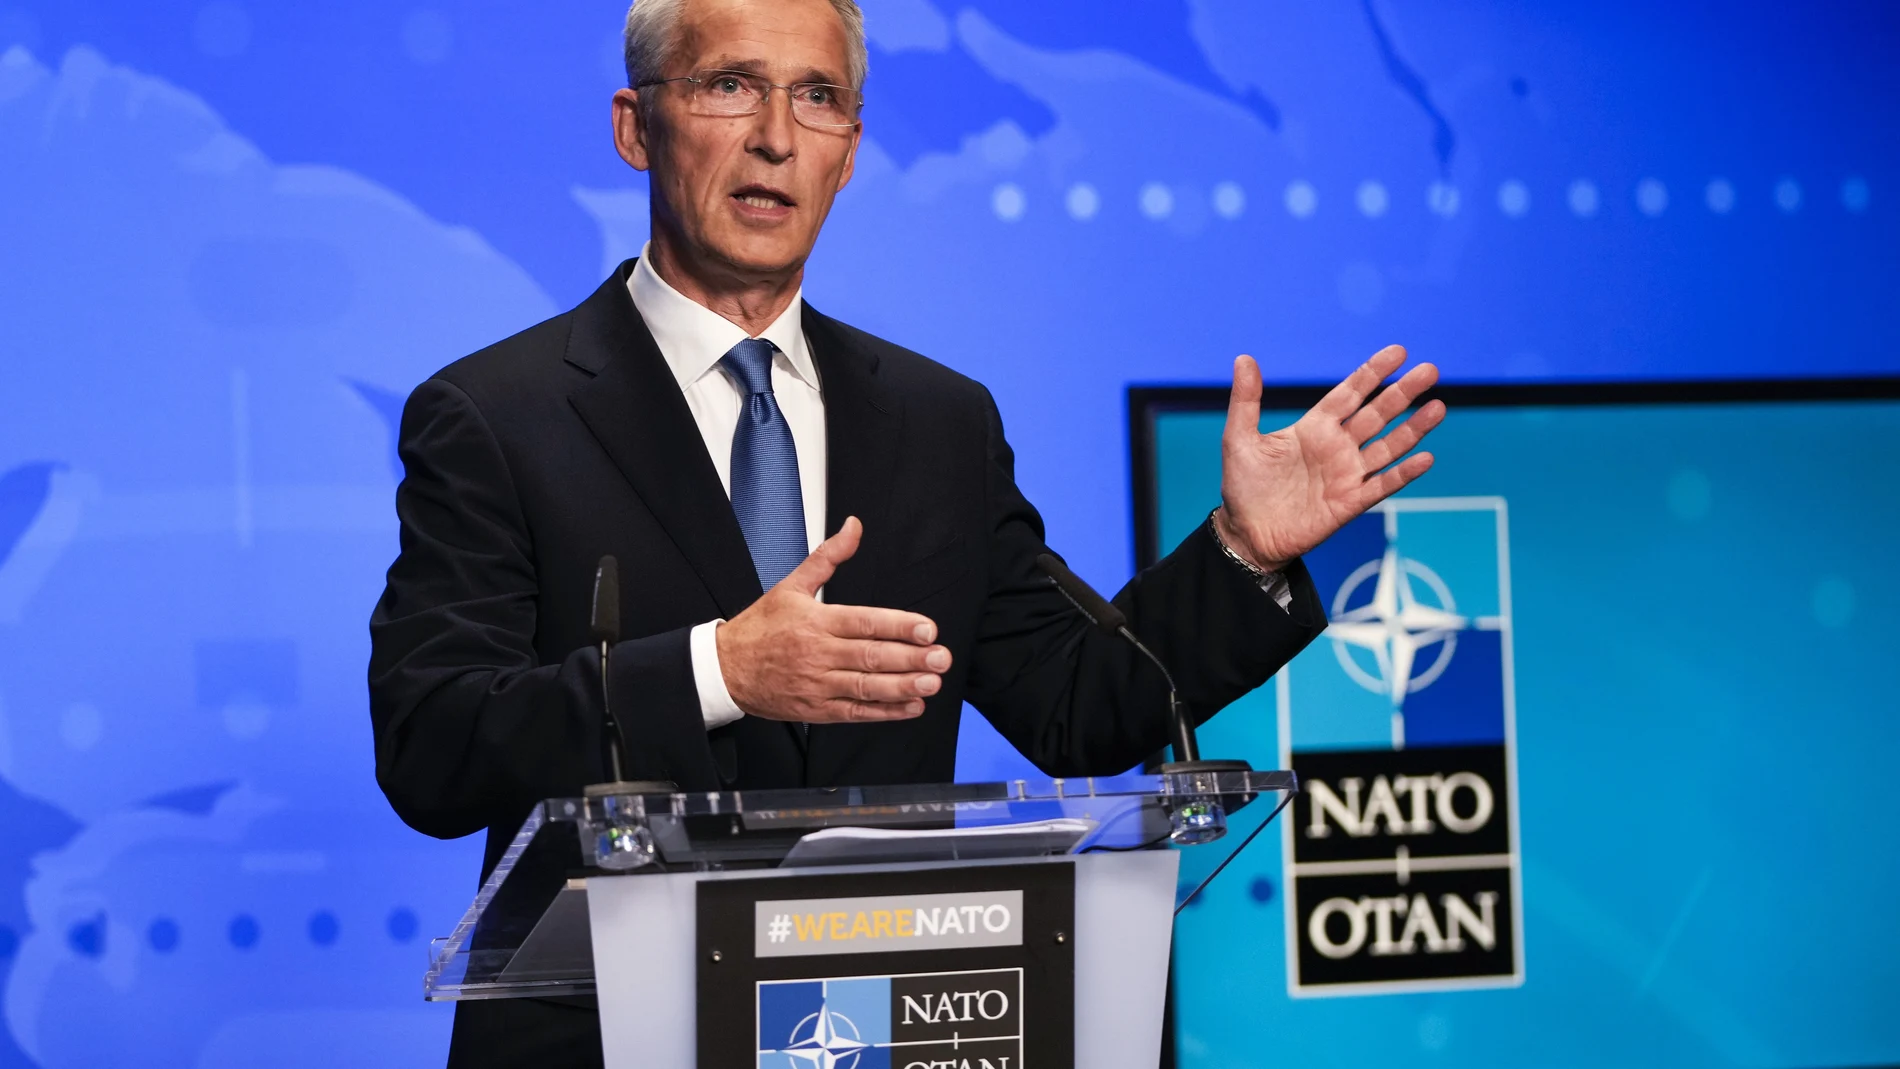 FILE - In this Friday, Aug. 20, 2021 file photo, NATO Secretary General Jens Stoltenberg gestures during an online news conference at NATO headquarters in Brussels. NATO Secretary-General Jens Stoltenberg urged China Monday, Sept. 6, 2021 to join international efforts to limit the spread of nuclear weapons amid concern that the country is rapidly developing missiles capable of carrying atomic warheads. (AP Photo/Francisco Seco, Pool, File)